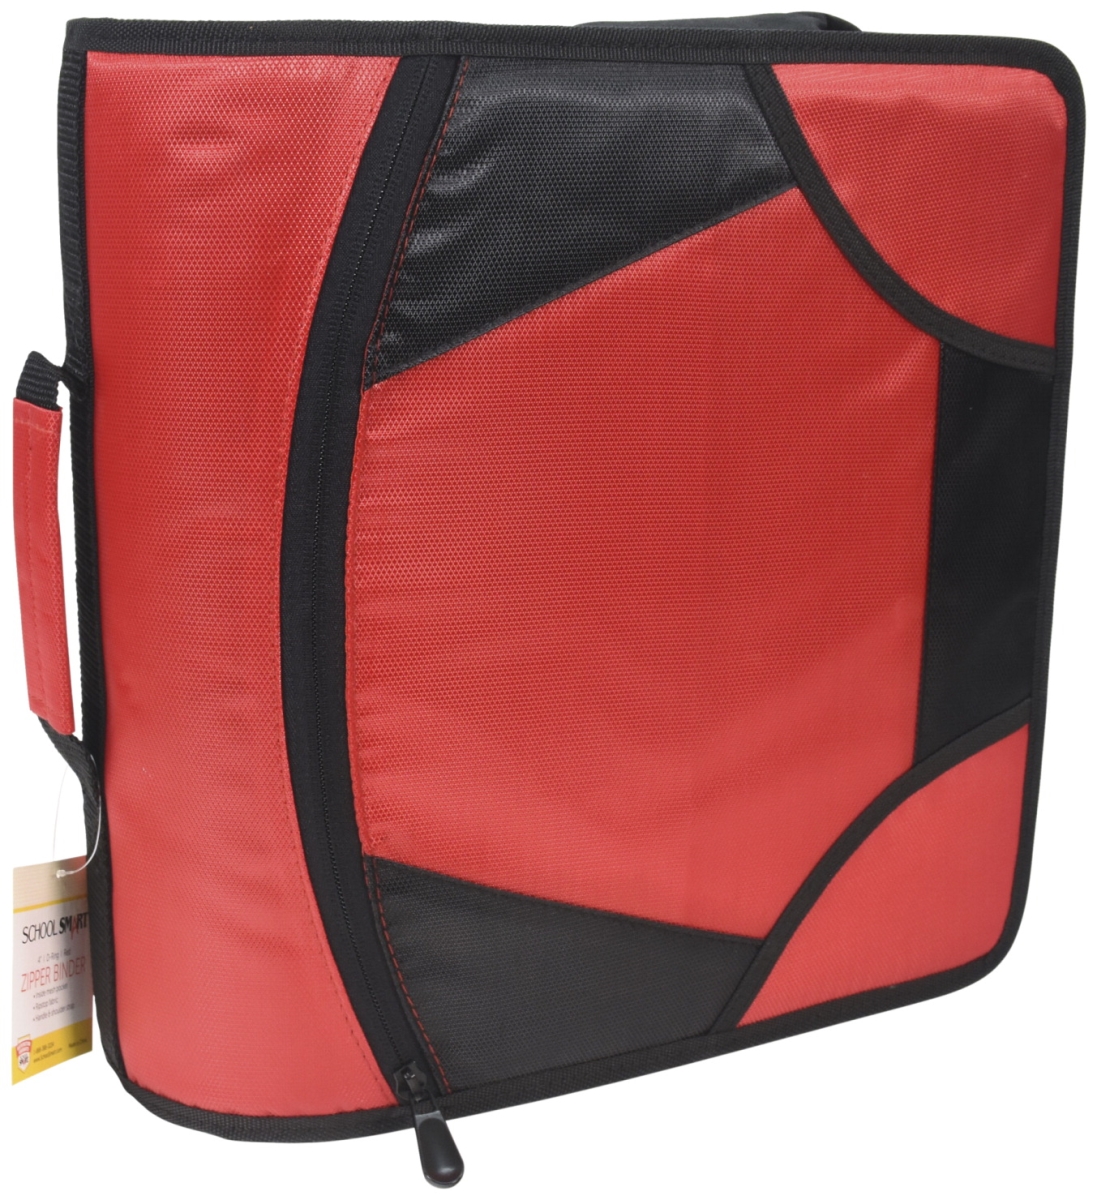 2019469 4 In. D-ring Zipper Binder With Tabs, Red